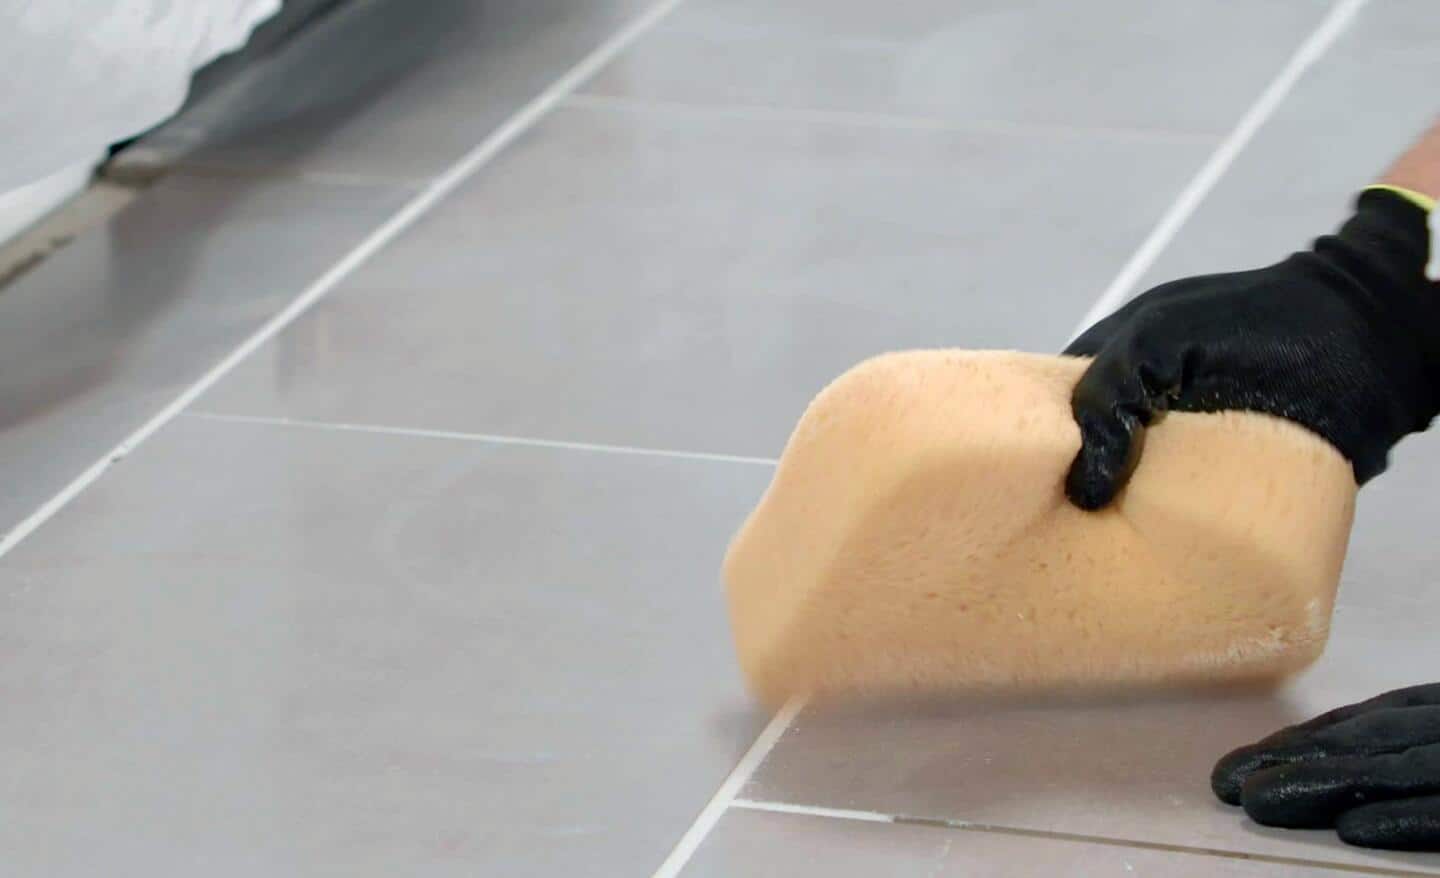 Person uses a damp sponge to wipe grout on a tile floor